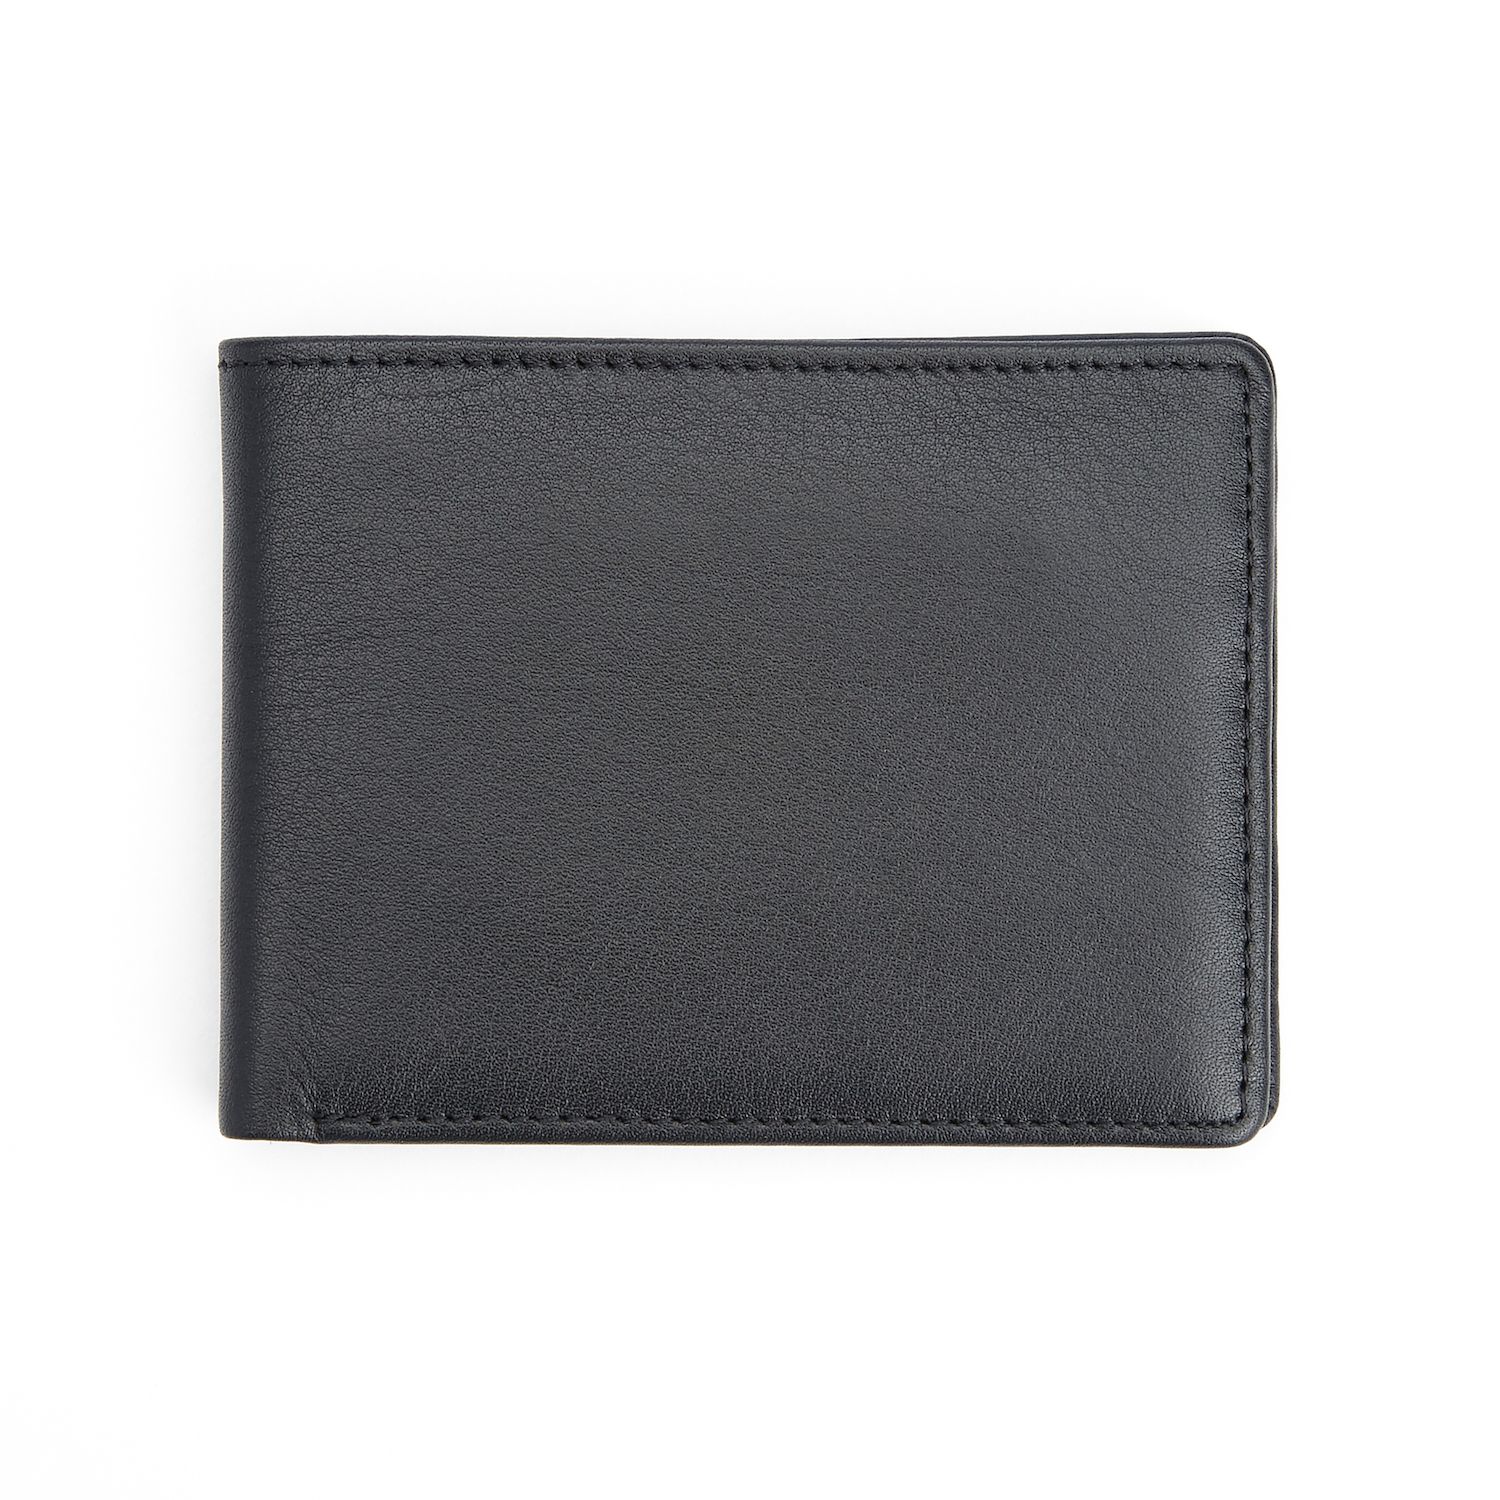 Eddie Bauer Men's Pioneer Leather and Printed Cotton Canvas Passcase  Wallet, Multi, One Size